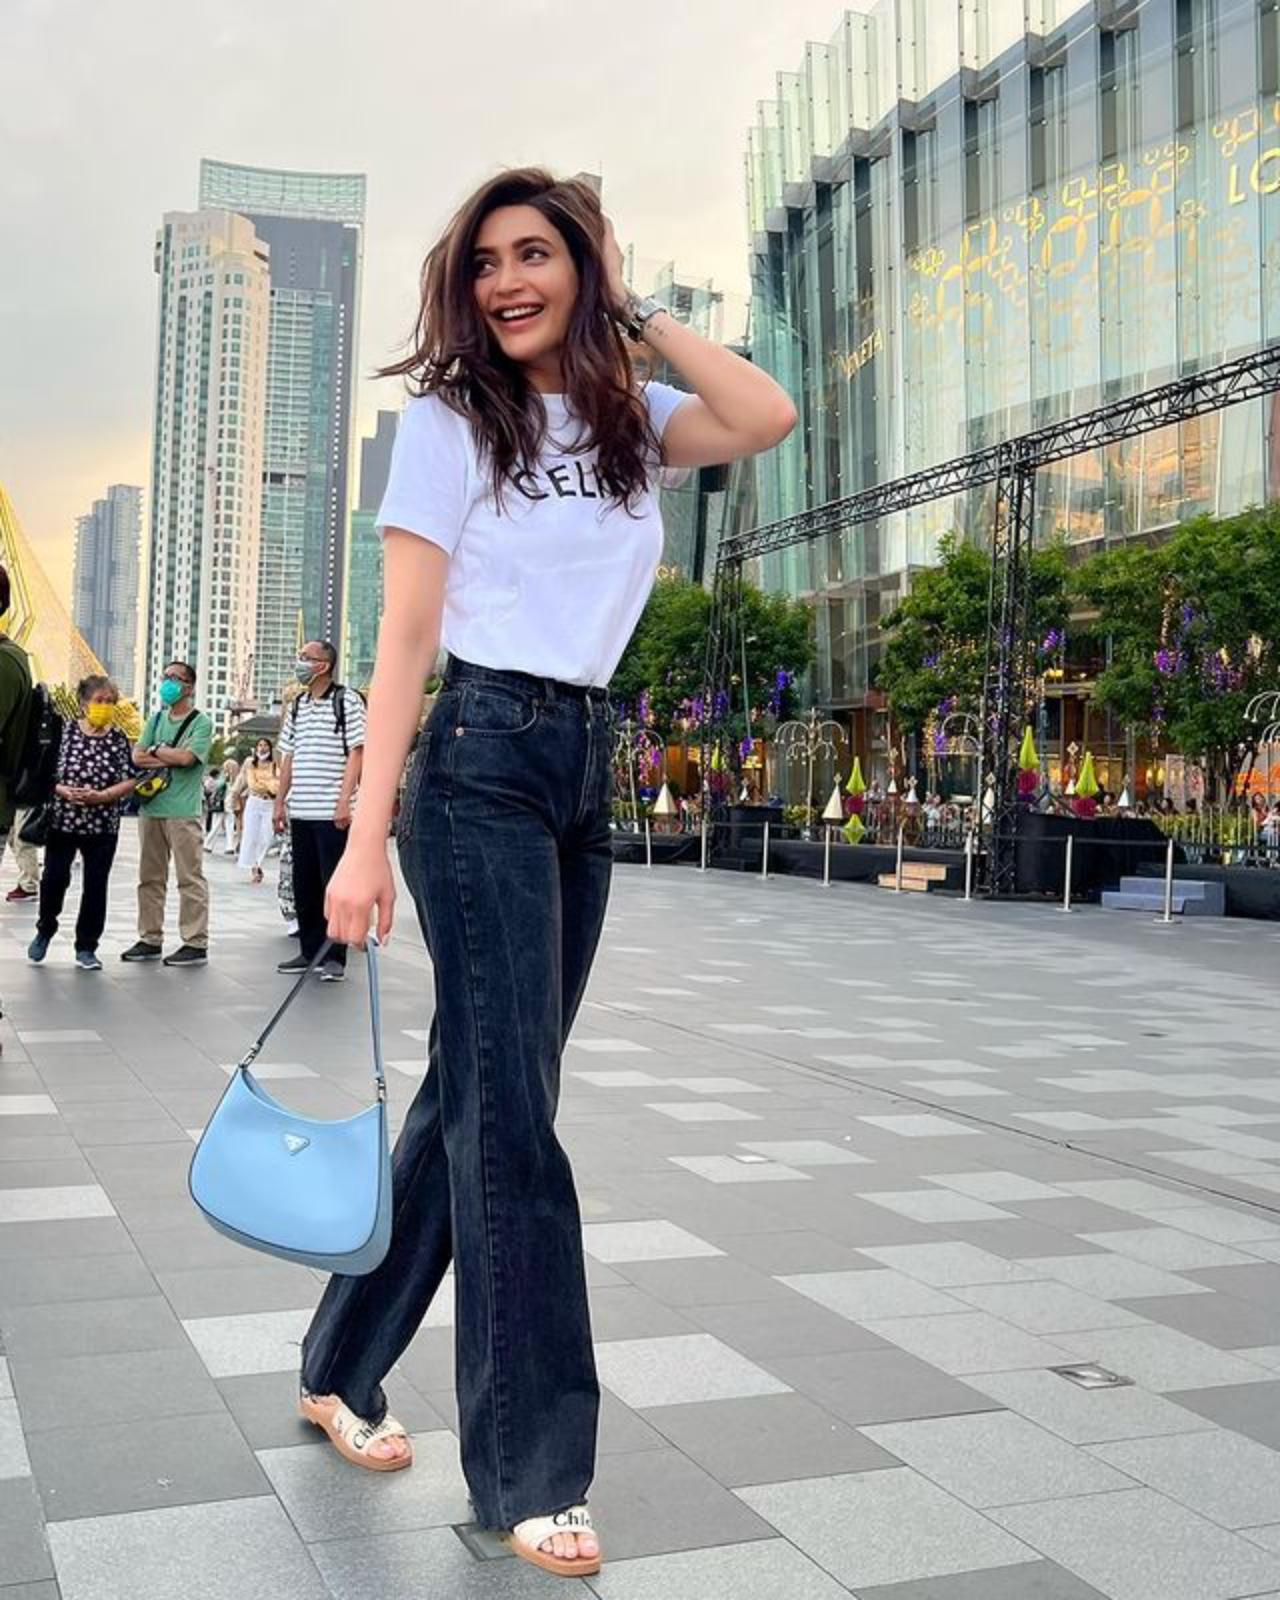 Let's take some fashion tips from Karishma Tanna as she slays the simple t-shirt and black jeans like a queen